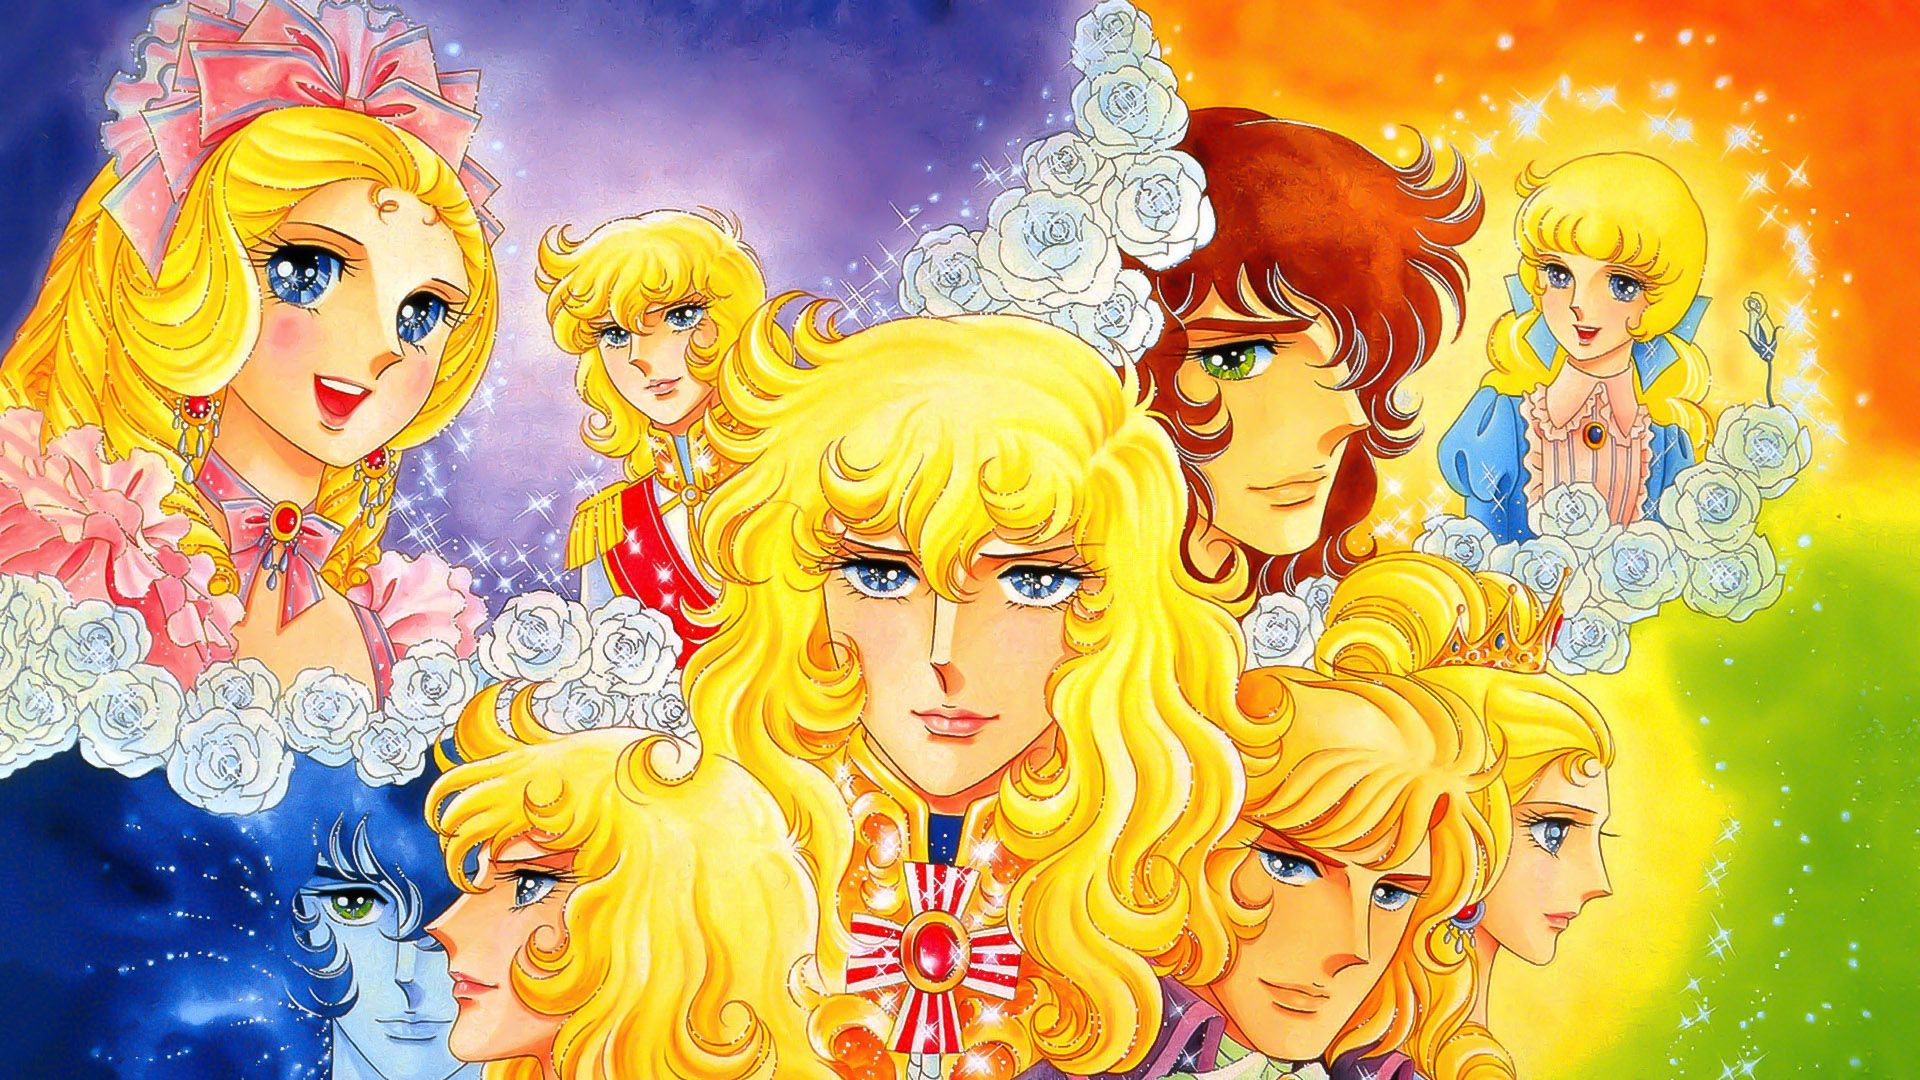 The Rose of Versailles background